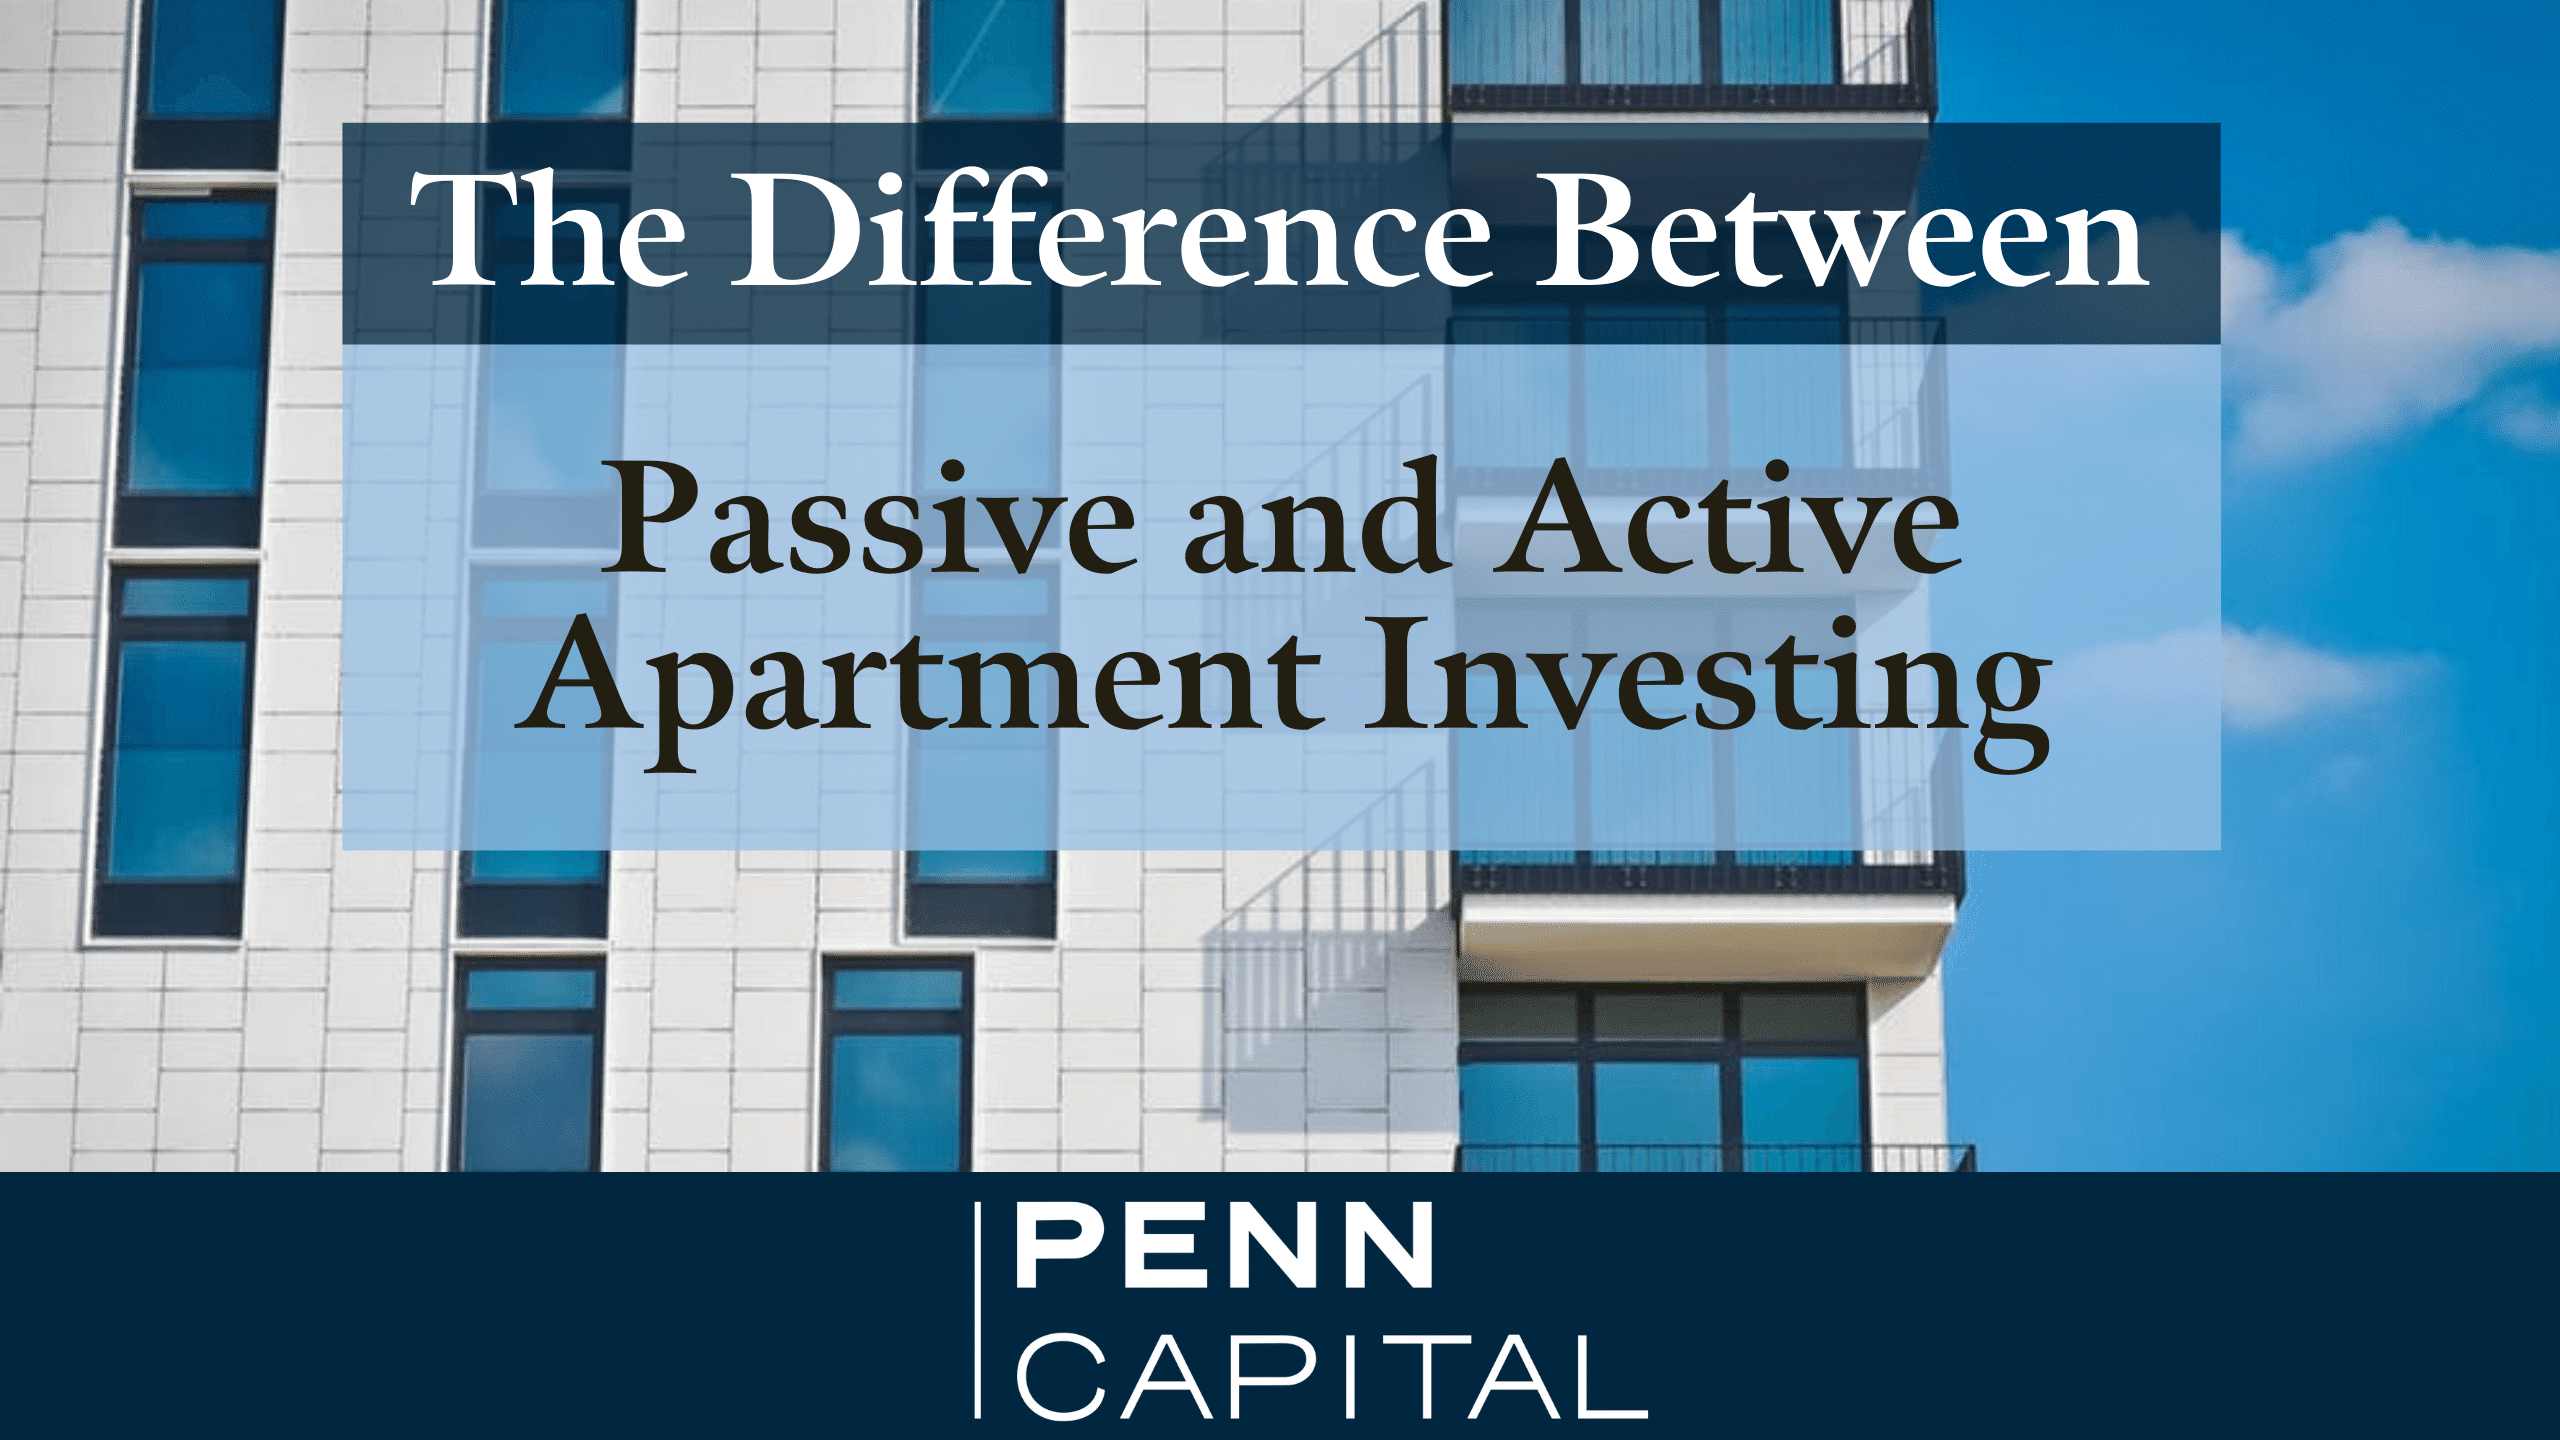 The difference between passive and active apartment investing - COMPRESSED